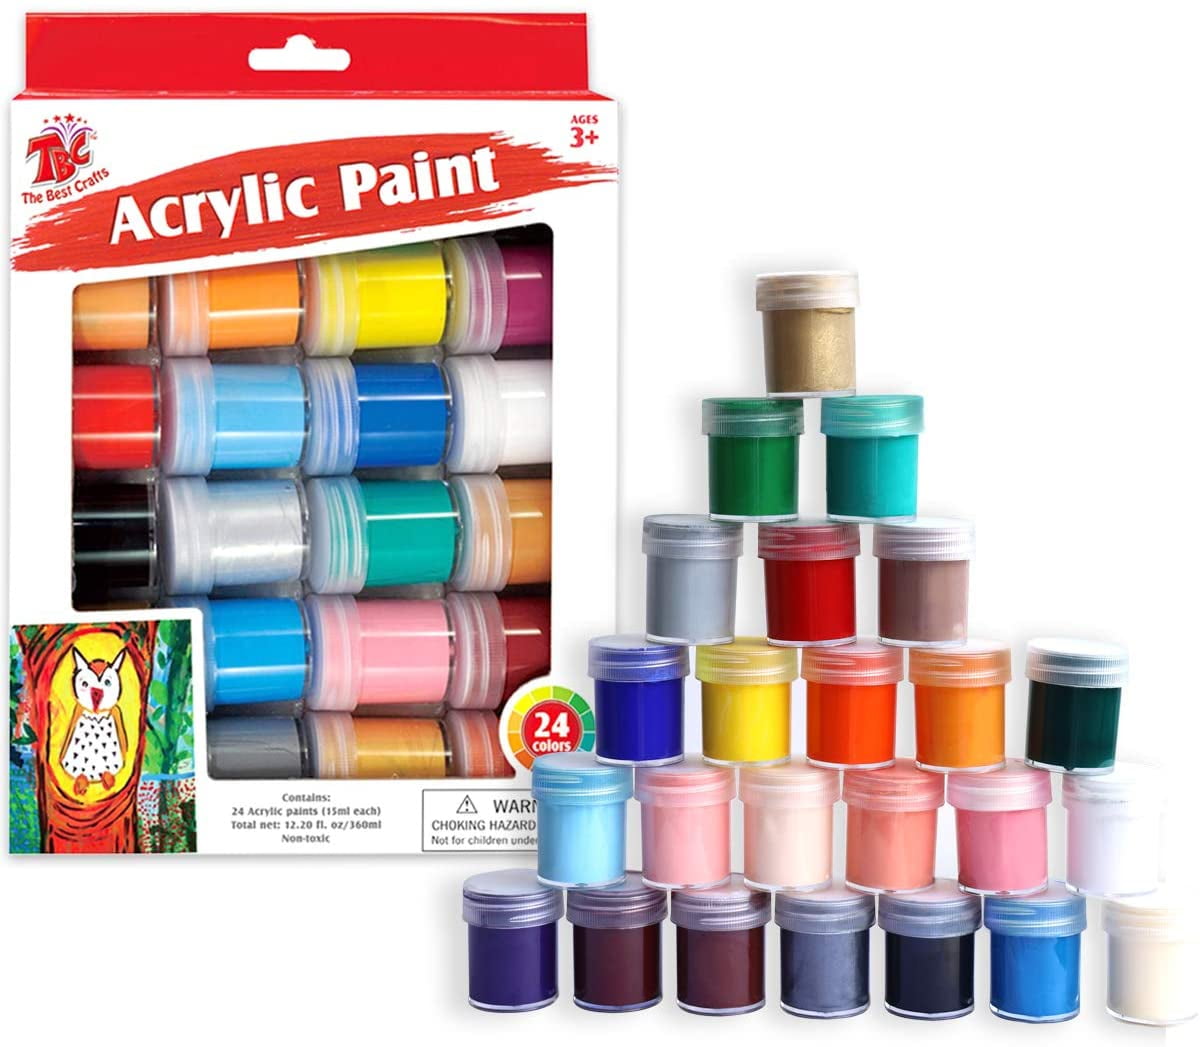 What are the best acrylic paints?